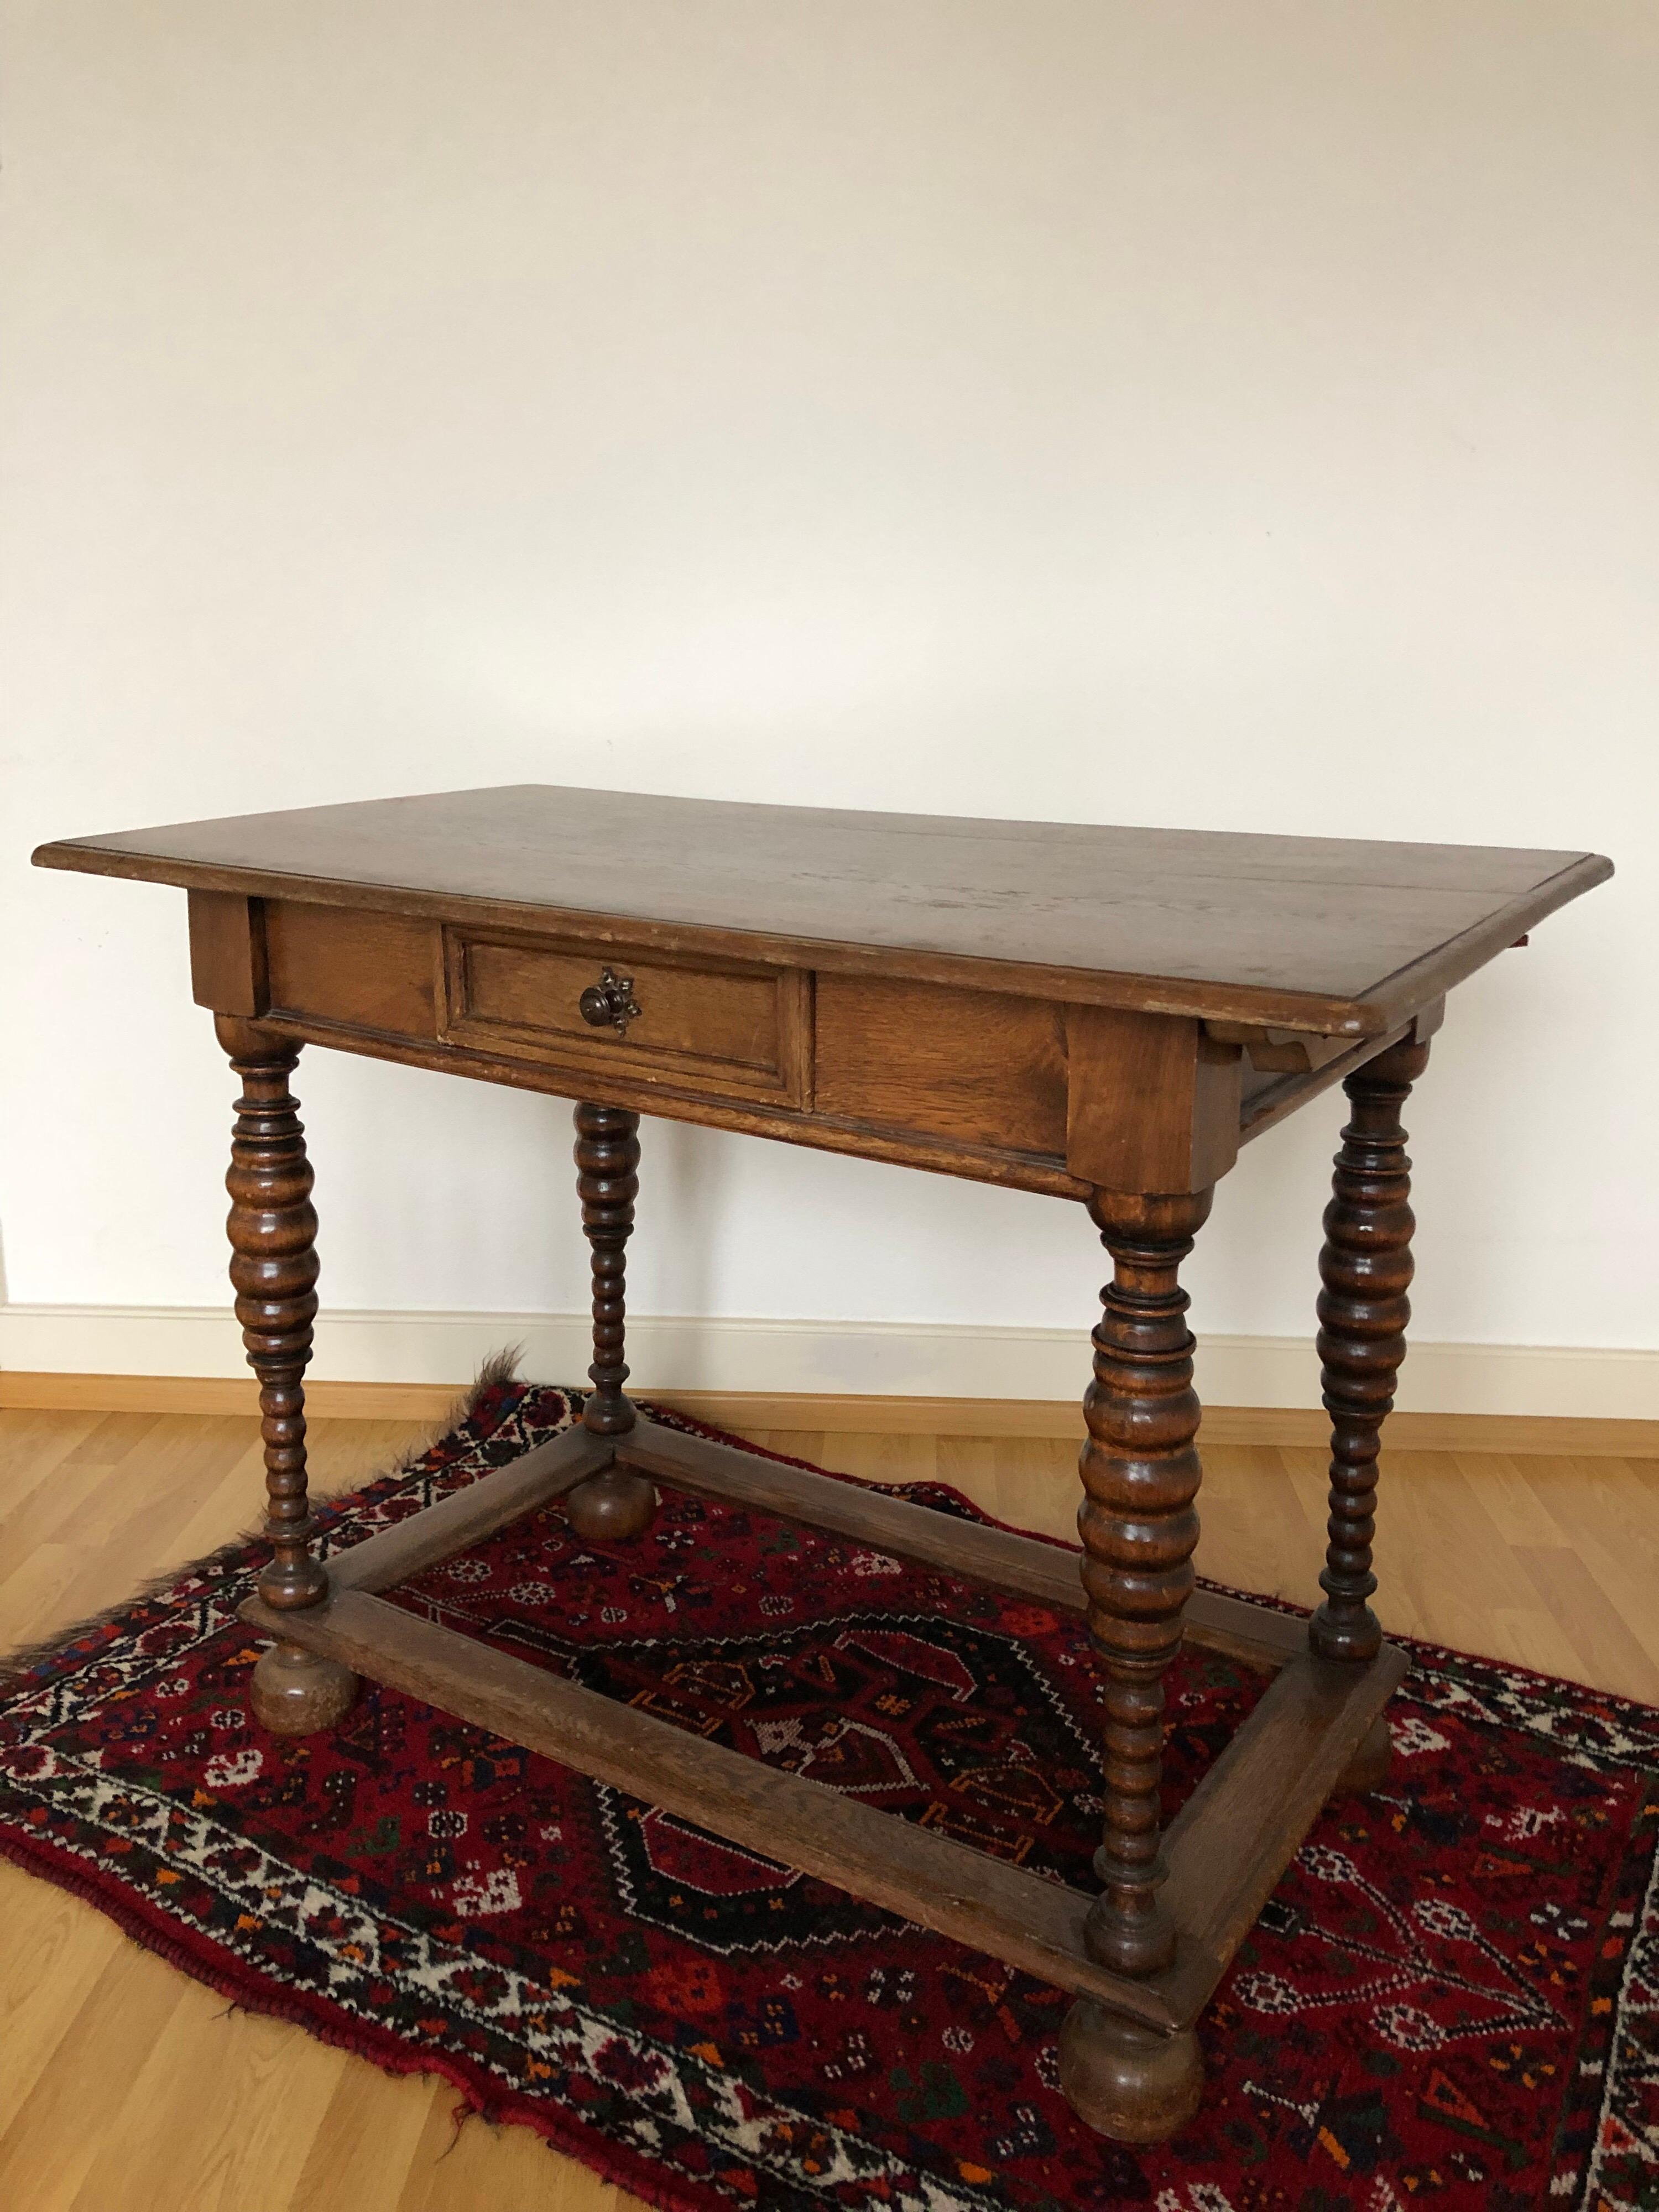 French Provincial Carved Wood Rustic Provincial Country French Farm Desk / Table, Early 1900s SALE